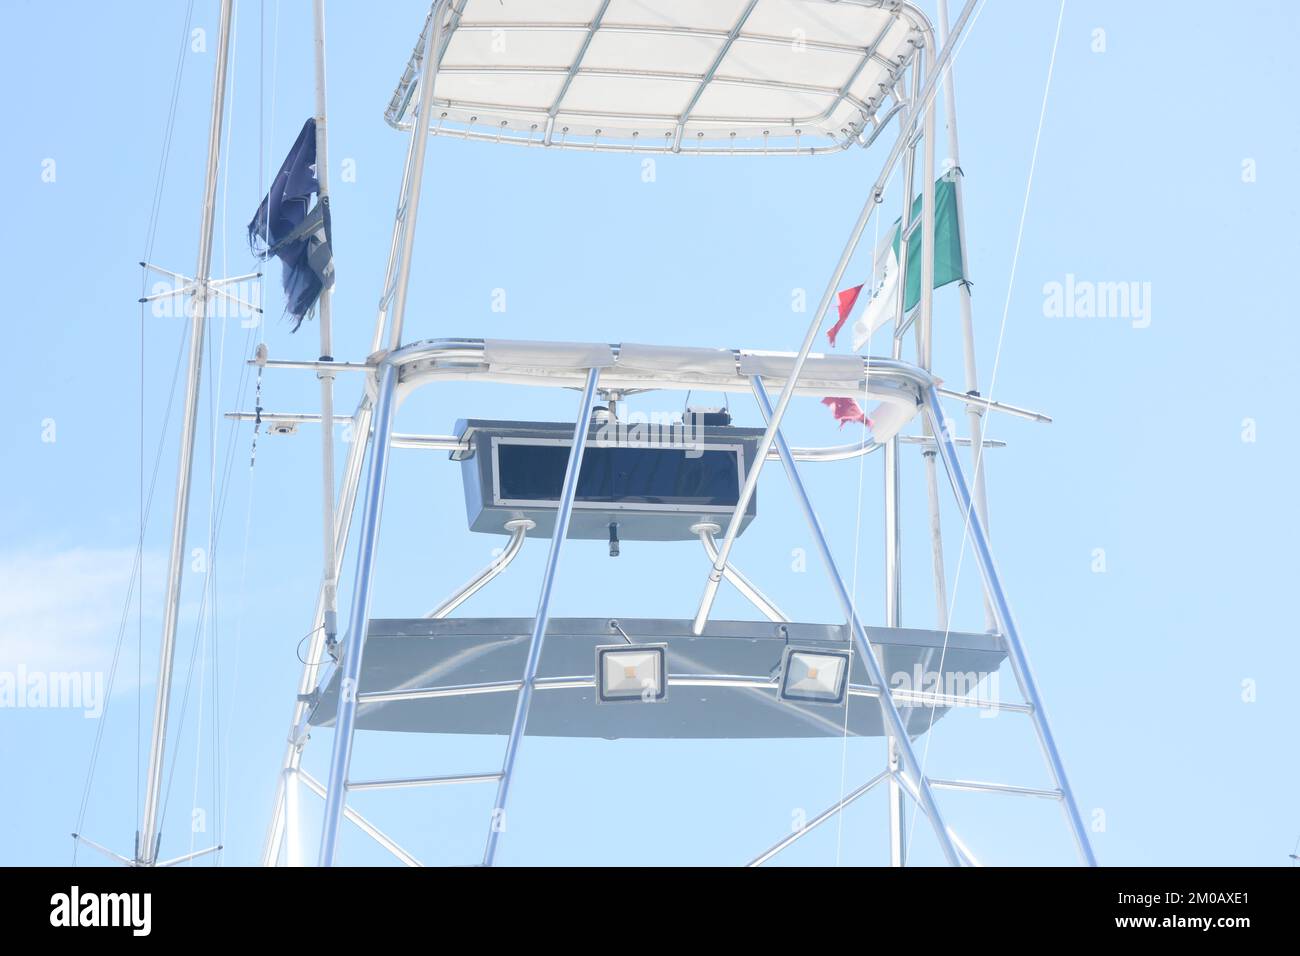 The tuna tower or flybridge is used to control a fishing boat while sailing in the open sea Stock Photo